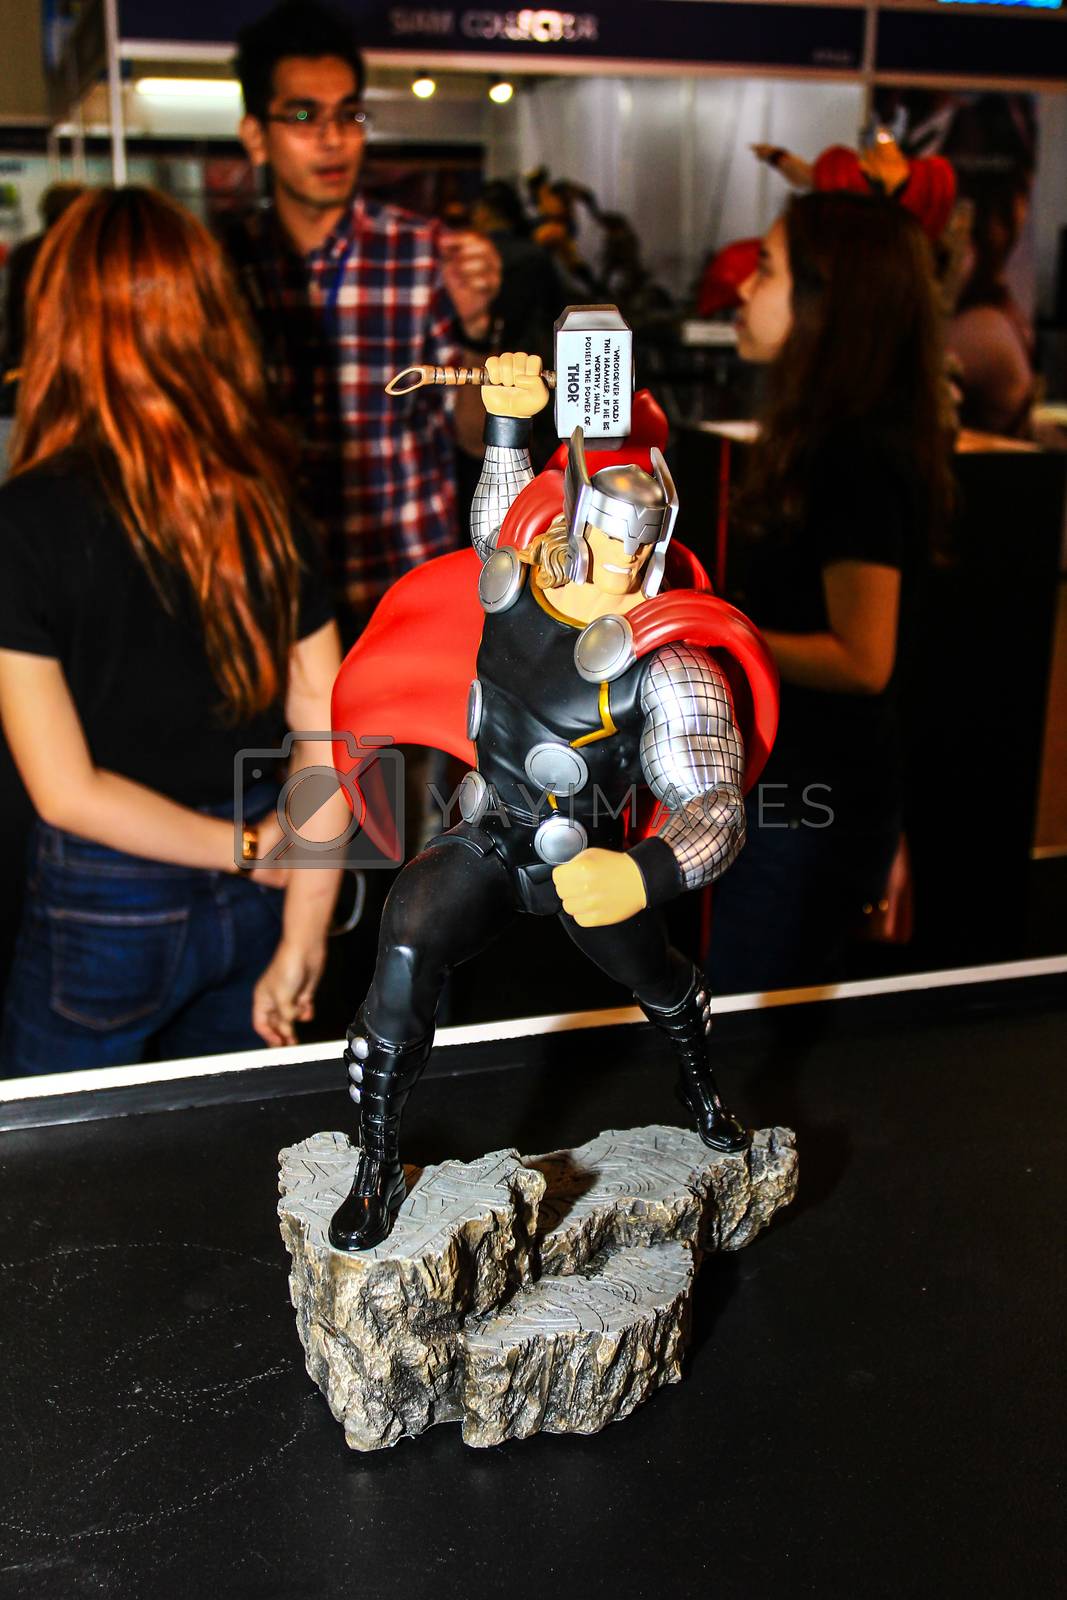 Royalty free image of A model of the character Thor from the movies and comics by redthirteen